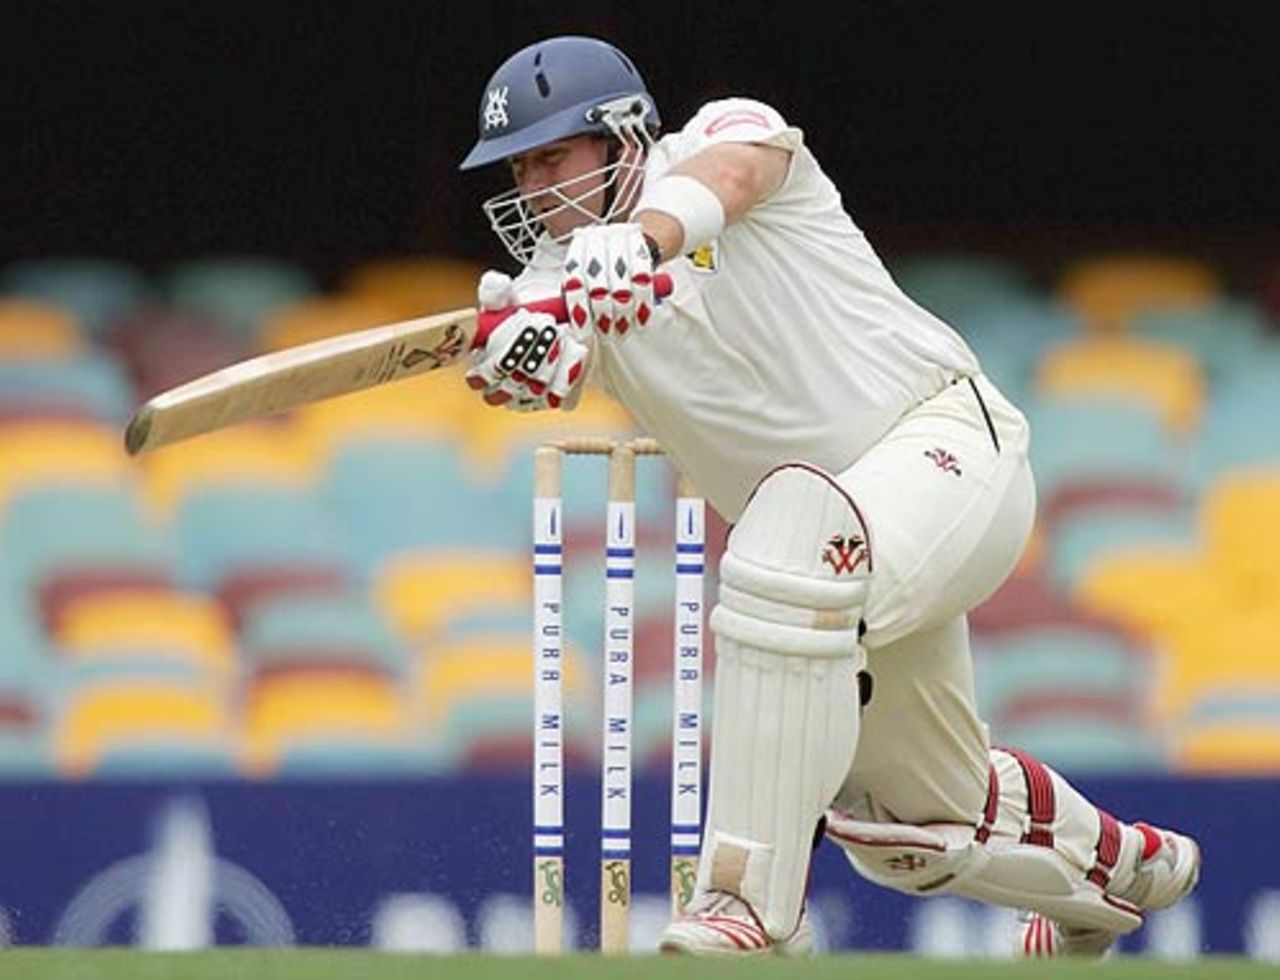 Jason Arnberger leans into a cover drive, Queensland v Victoria, Pura Cup final, 1st day, Brisbane, March 24, 2006